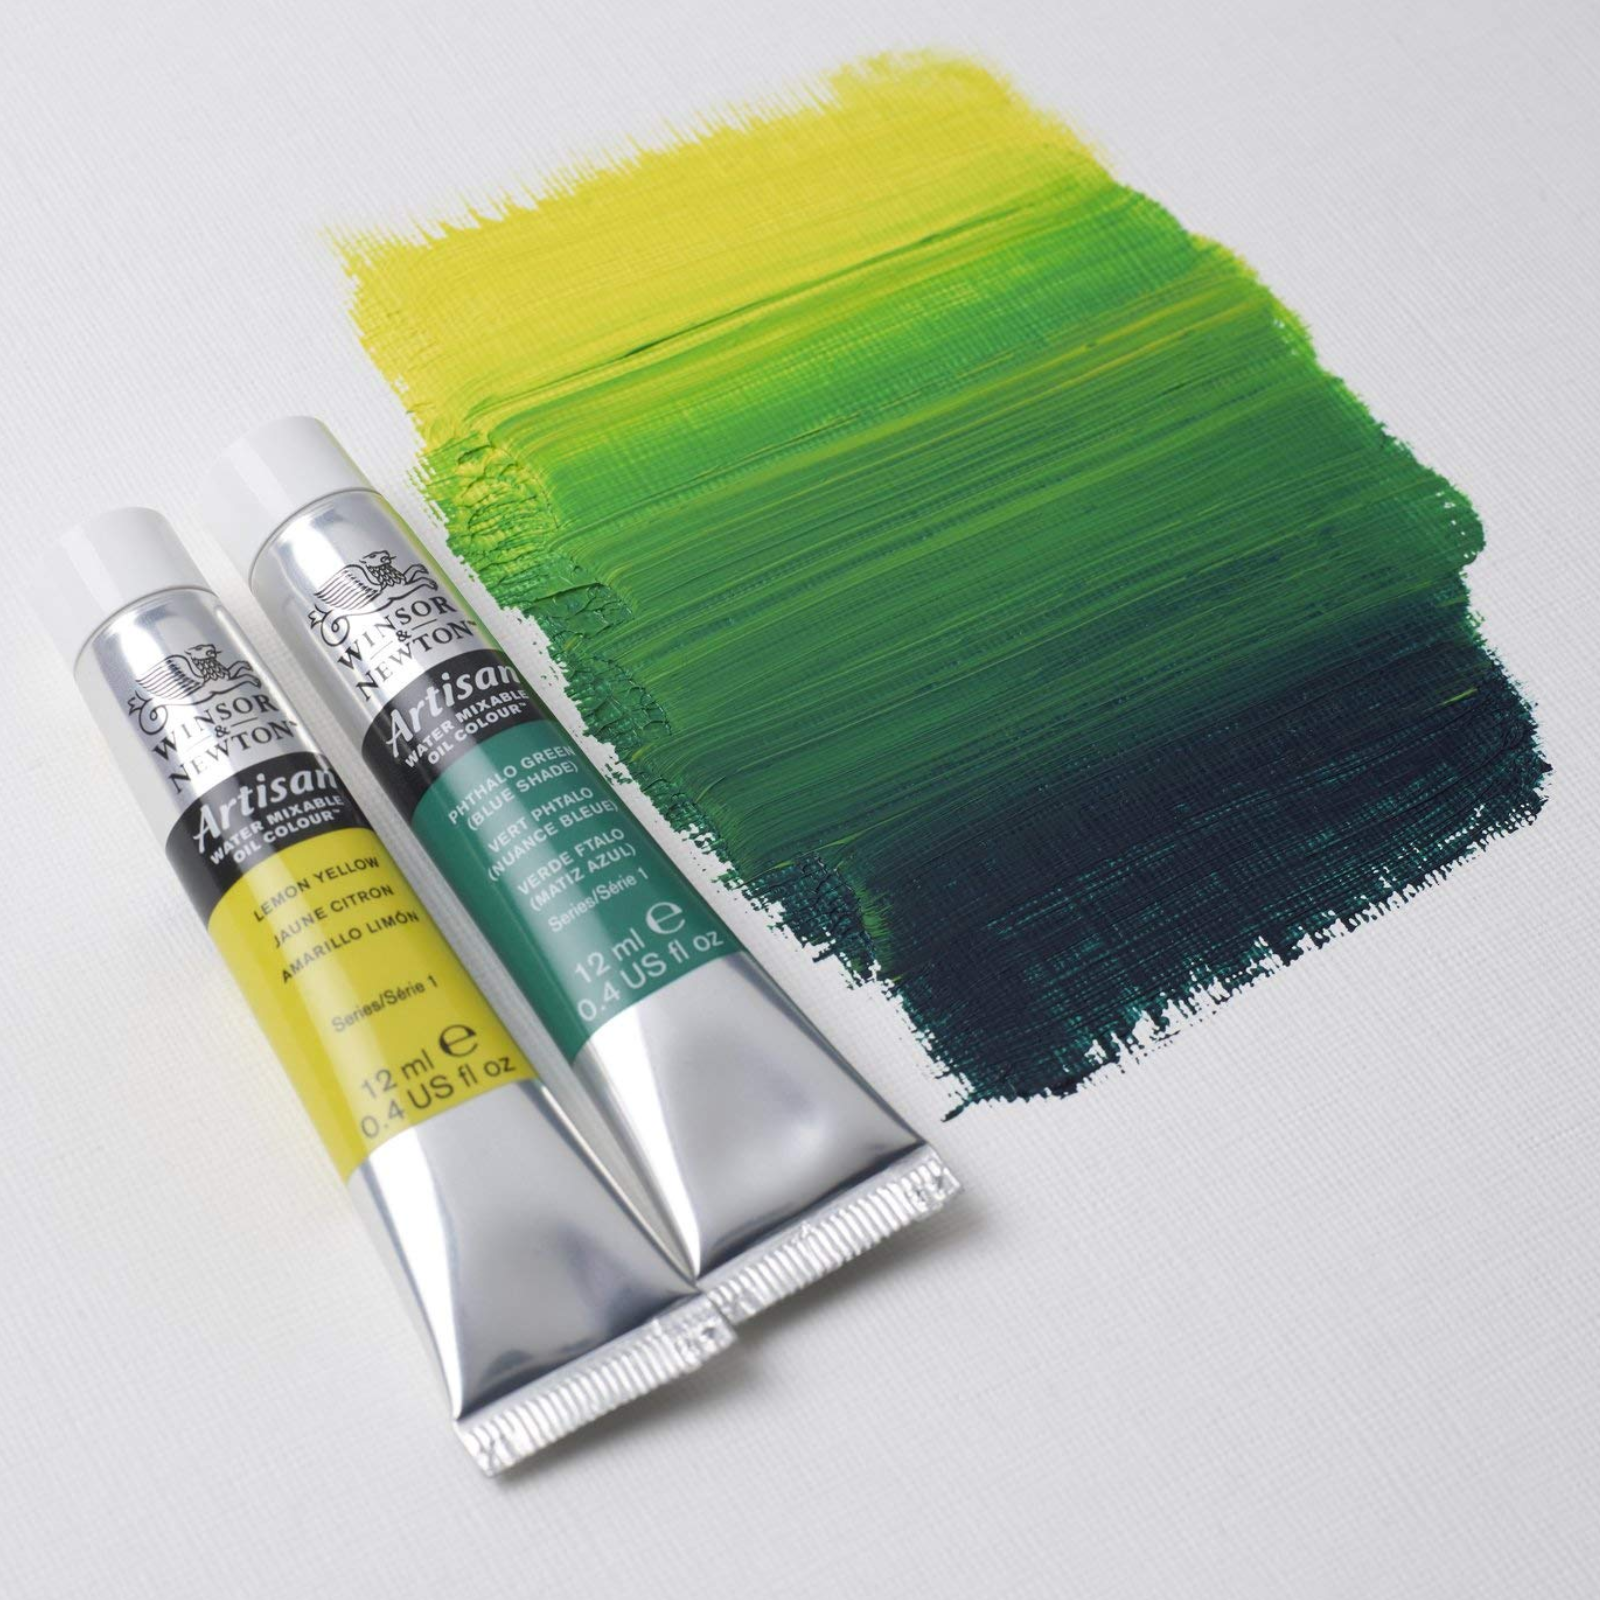 Winsor & Newton Artisan Water Mixable Oil Colour Set - Colours are touch dry in 2-12 days